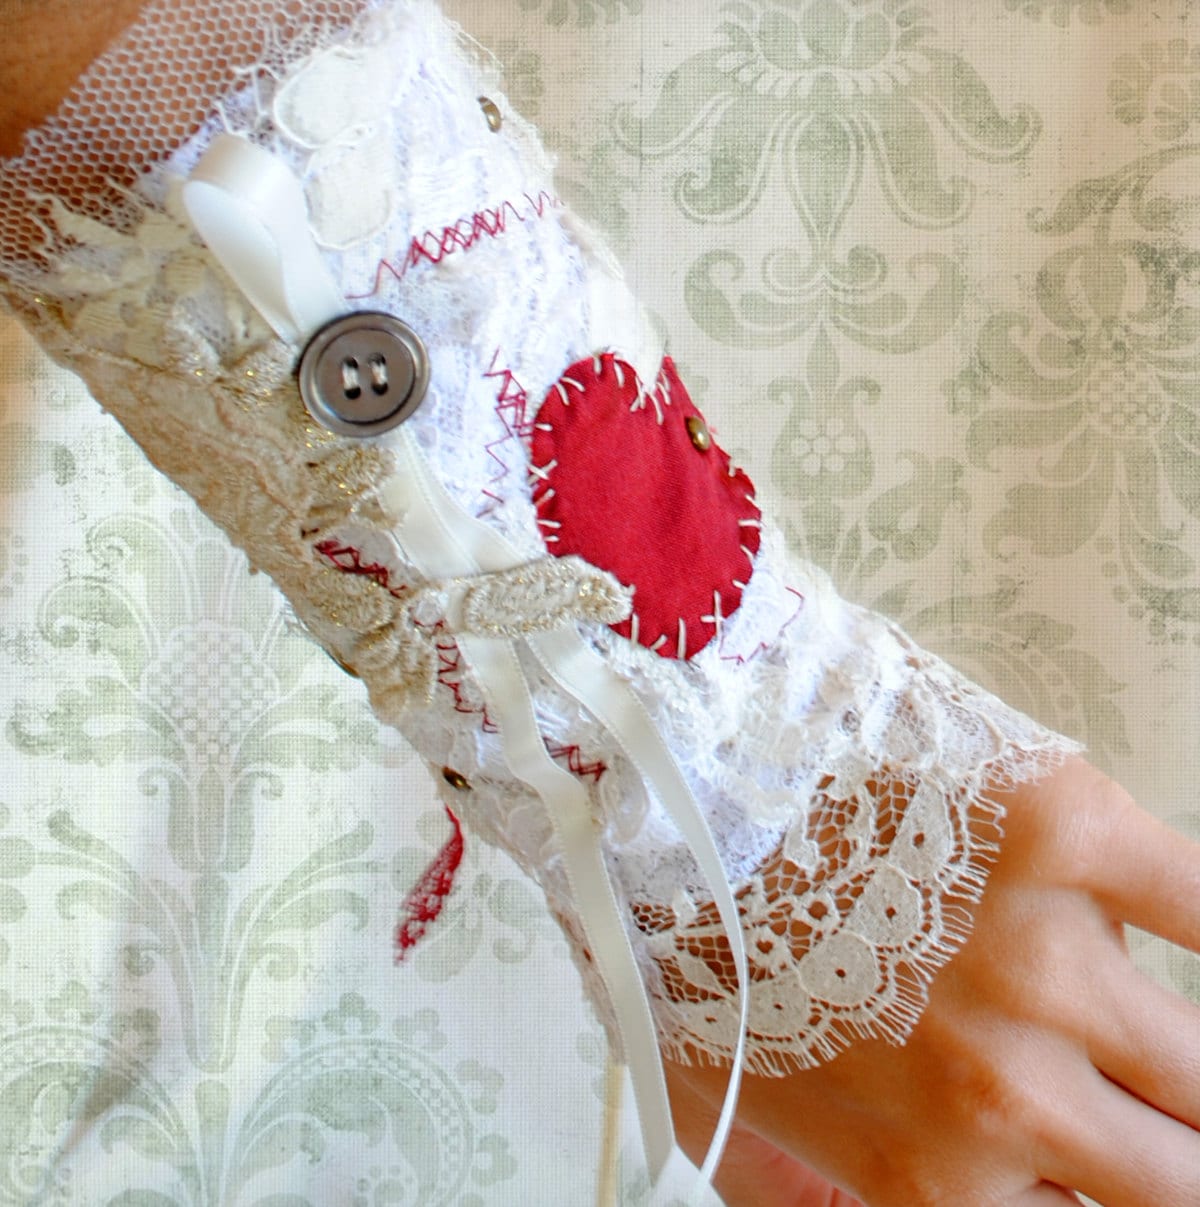 Victorian Tea-Party Lace Wrist Cuff - Torn and Tattered Red Heart